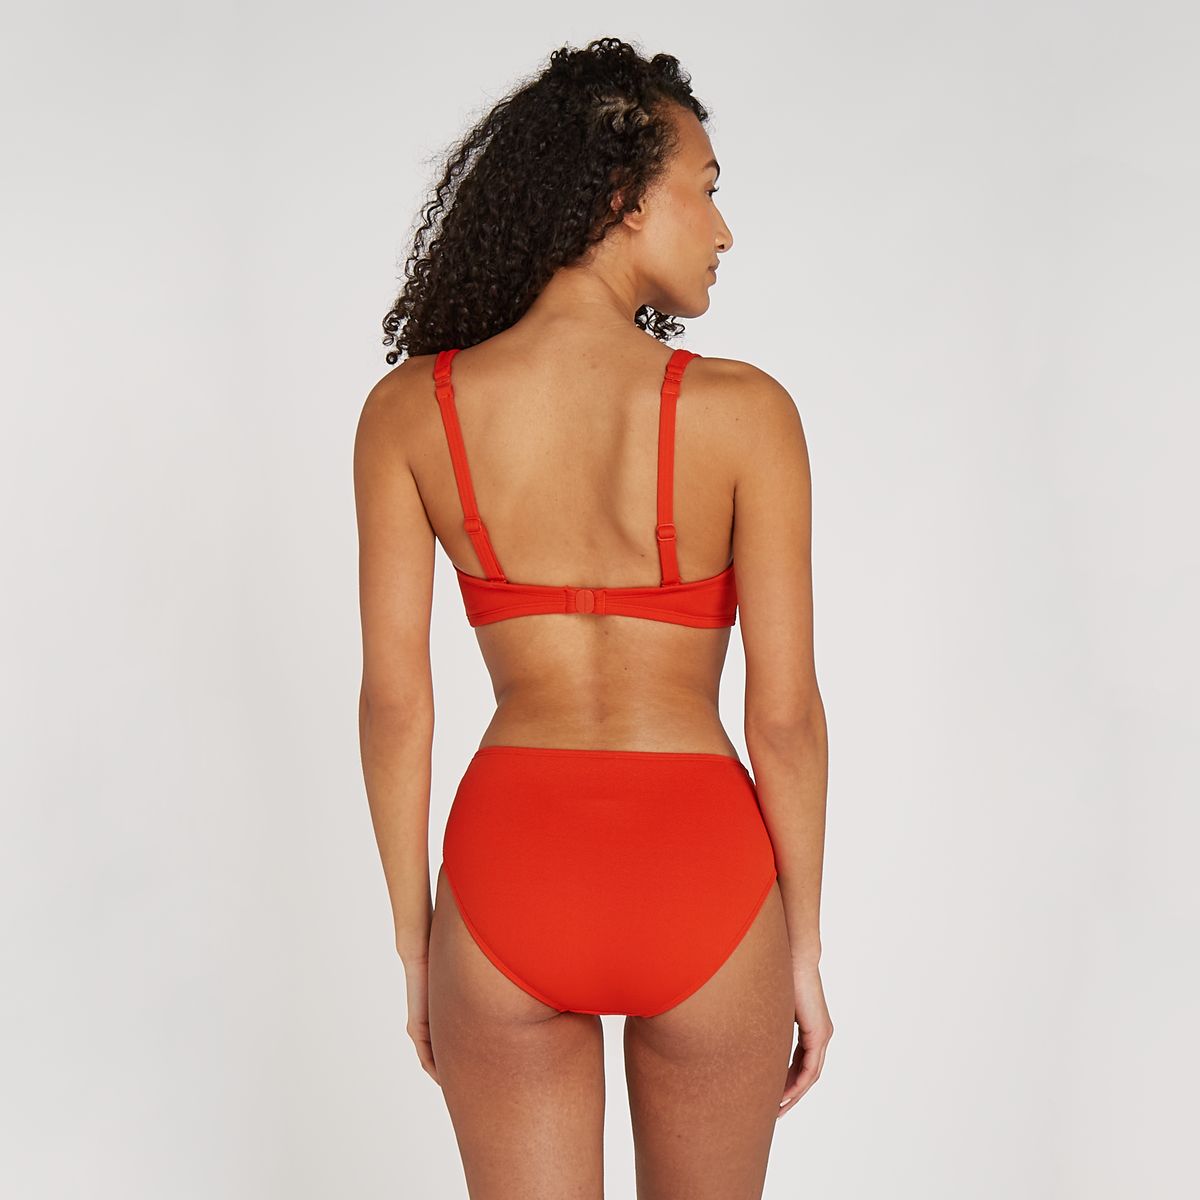 Twisted bikini top summer red relief